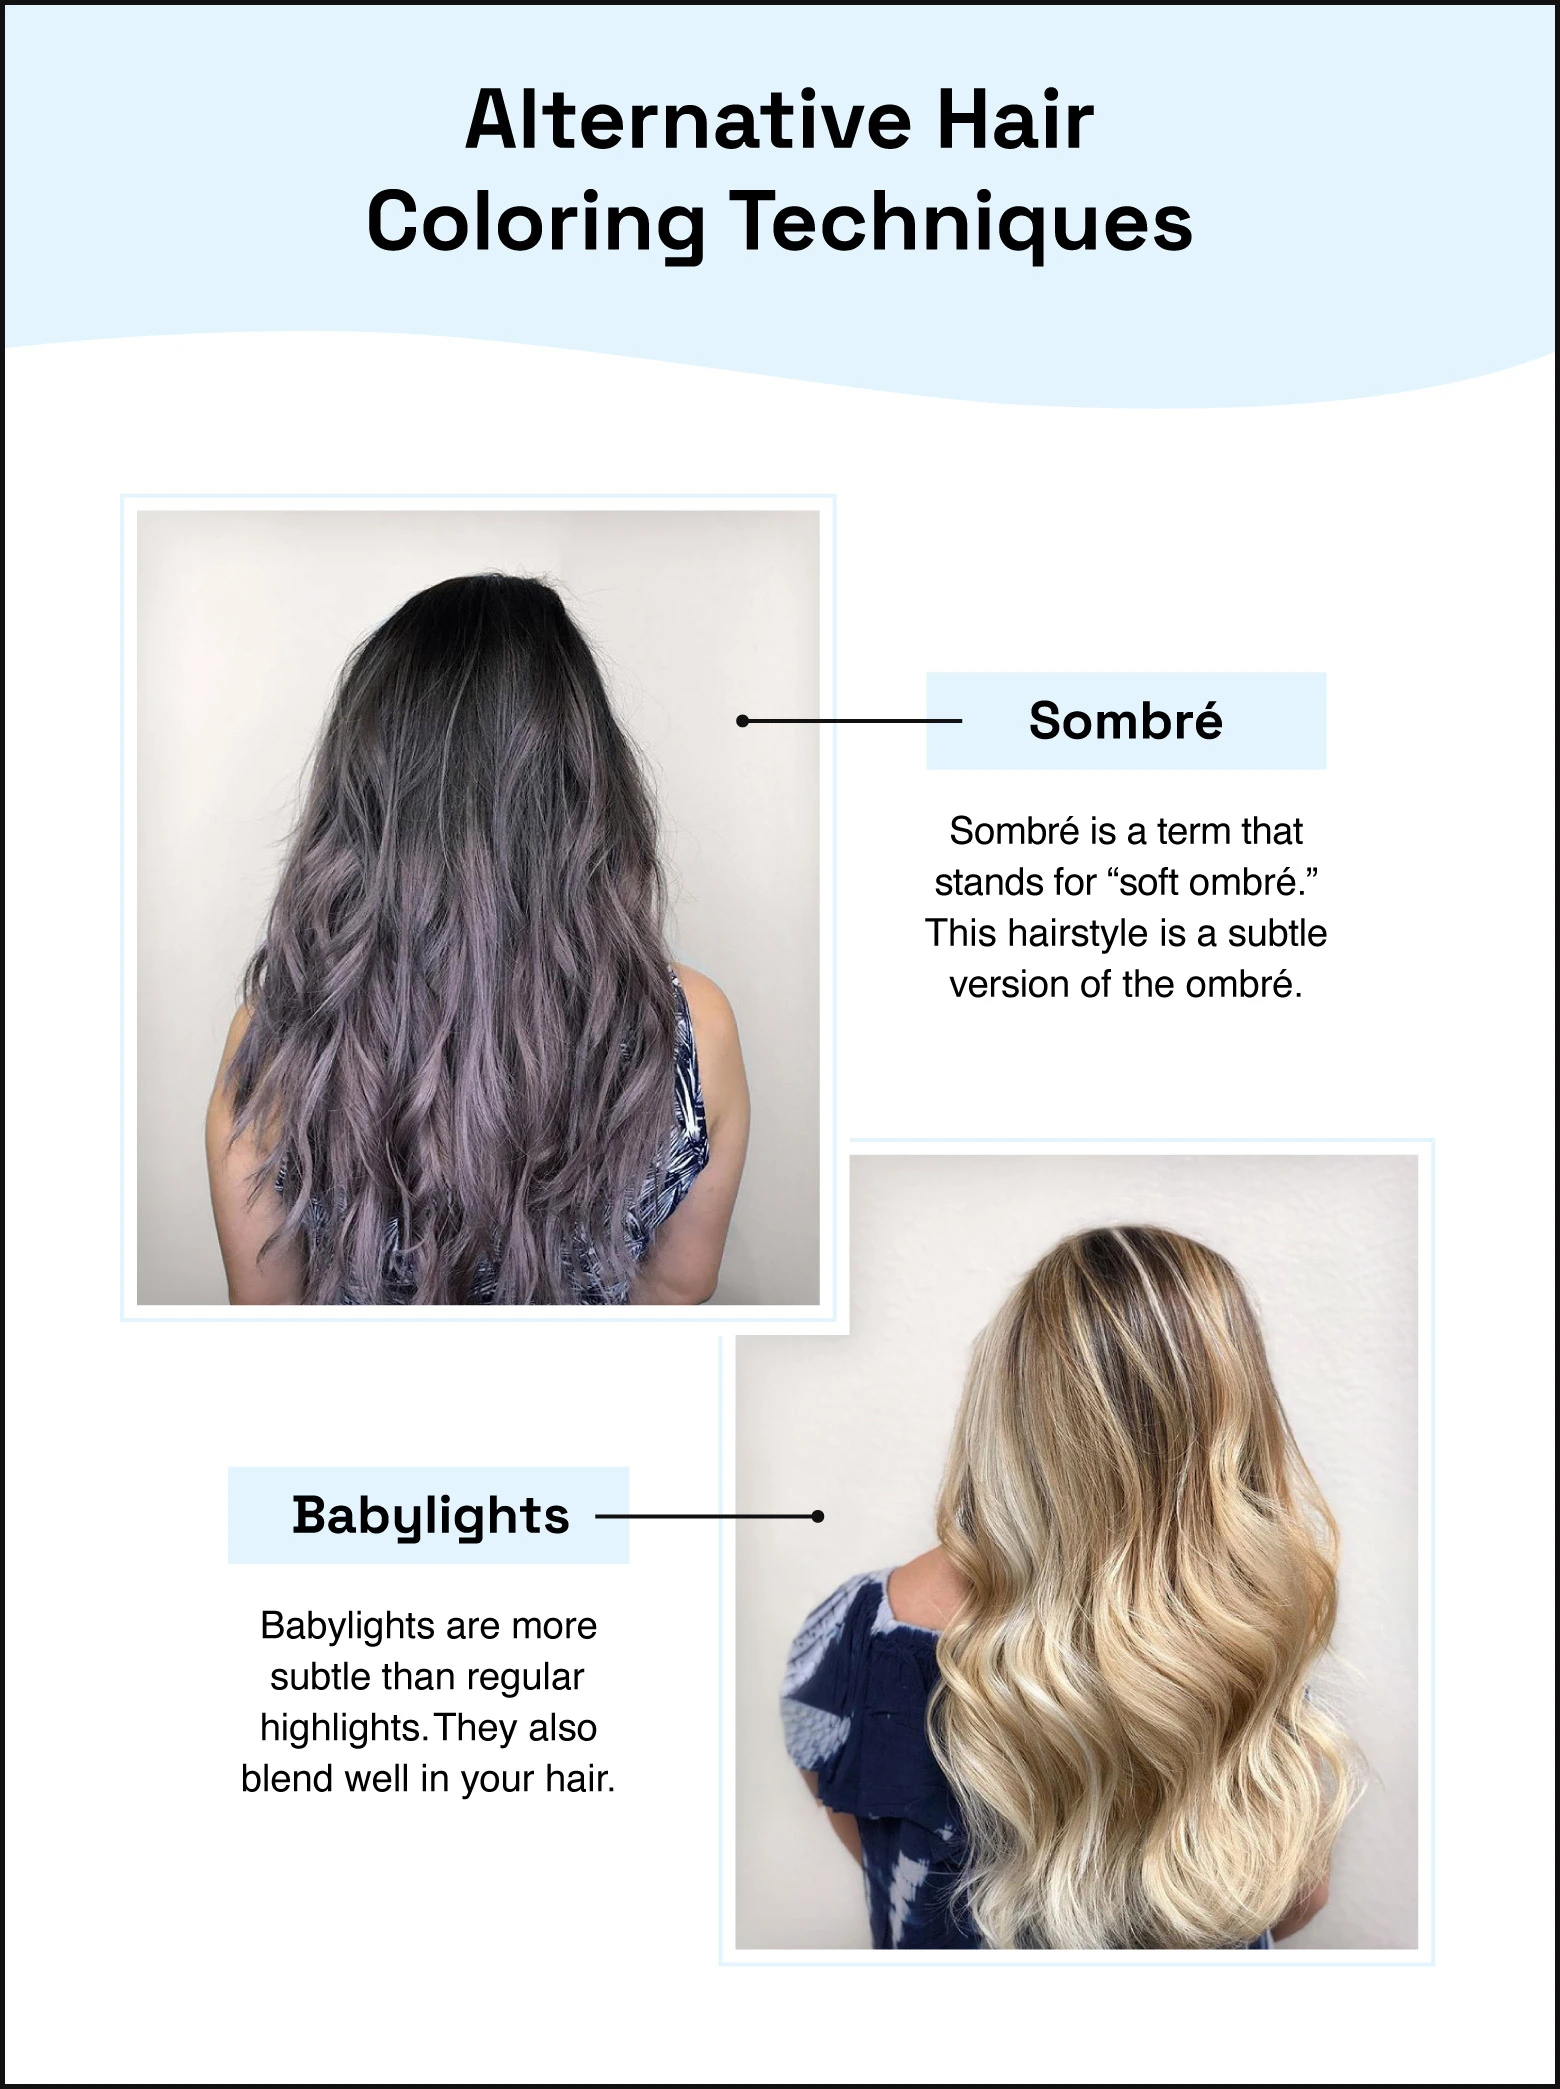 photos and descriptions of sombre and babylights hair coloring techniques